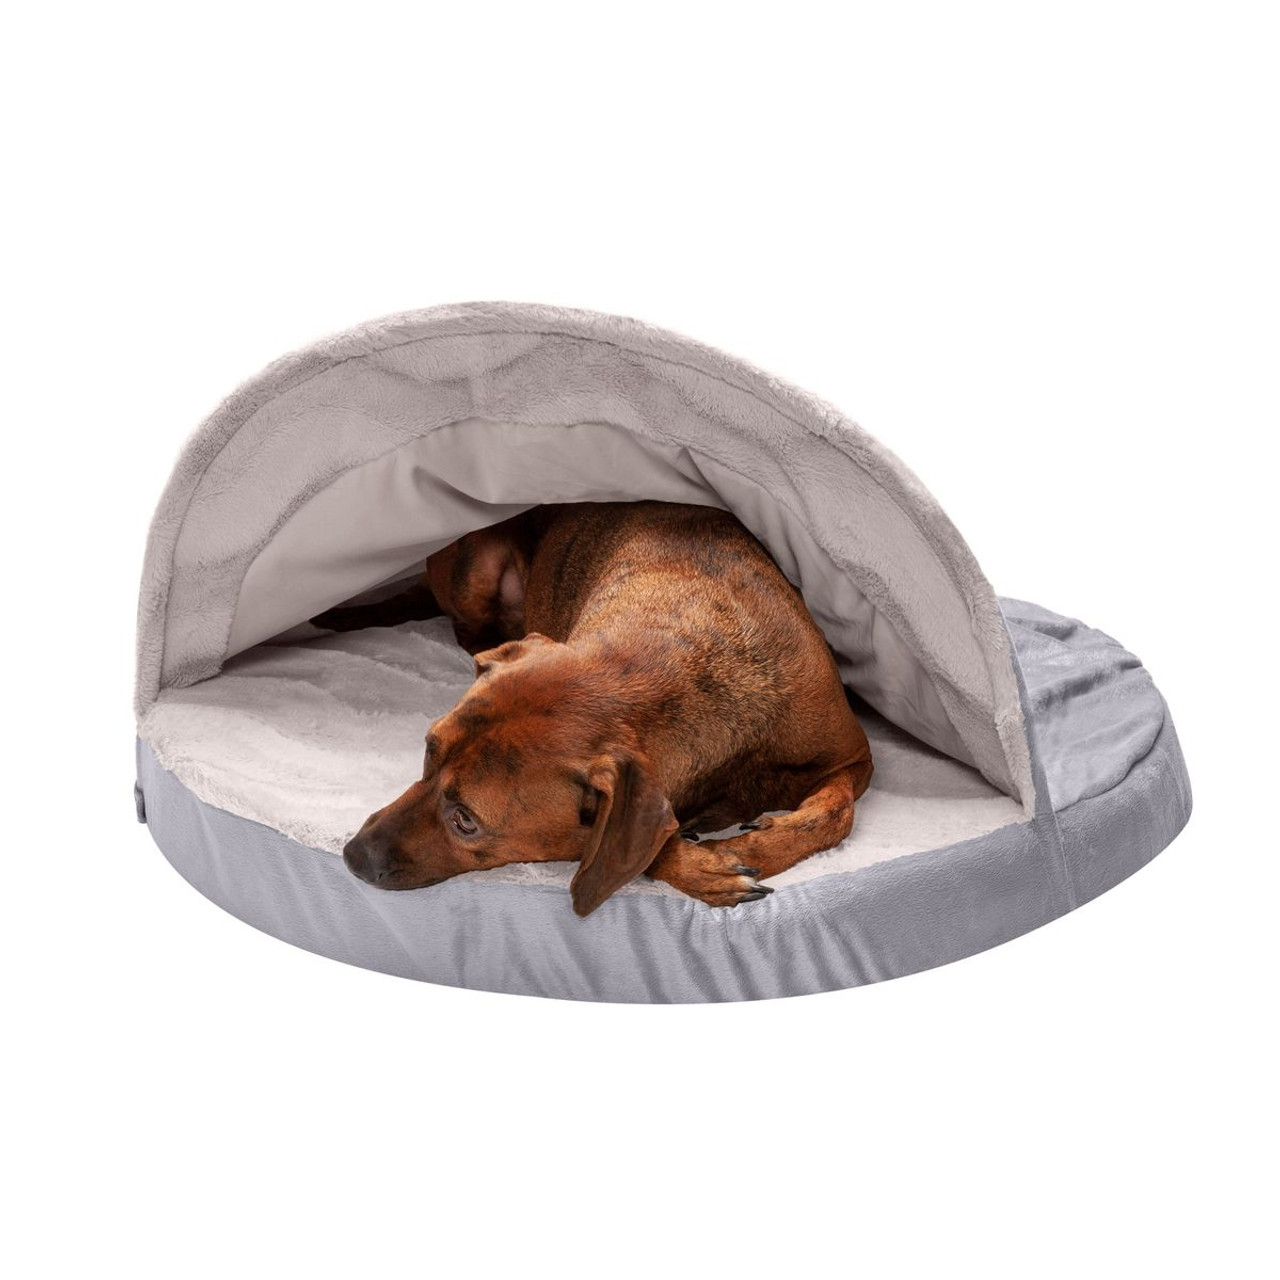 FurHaven® Snuggery Burrow Dog Bed product image